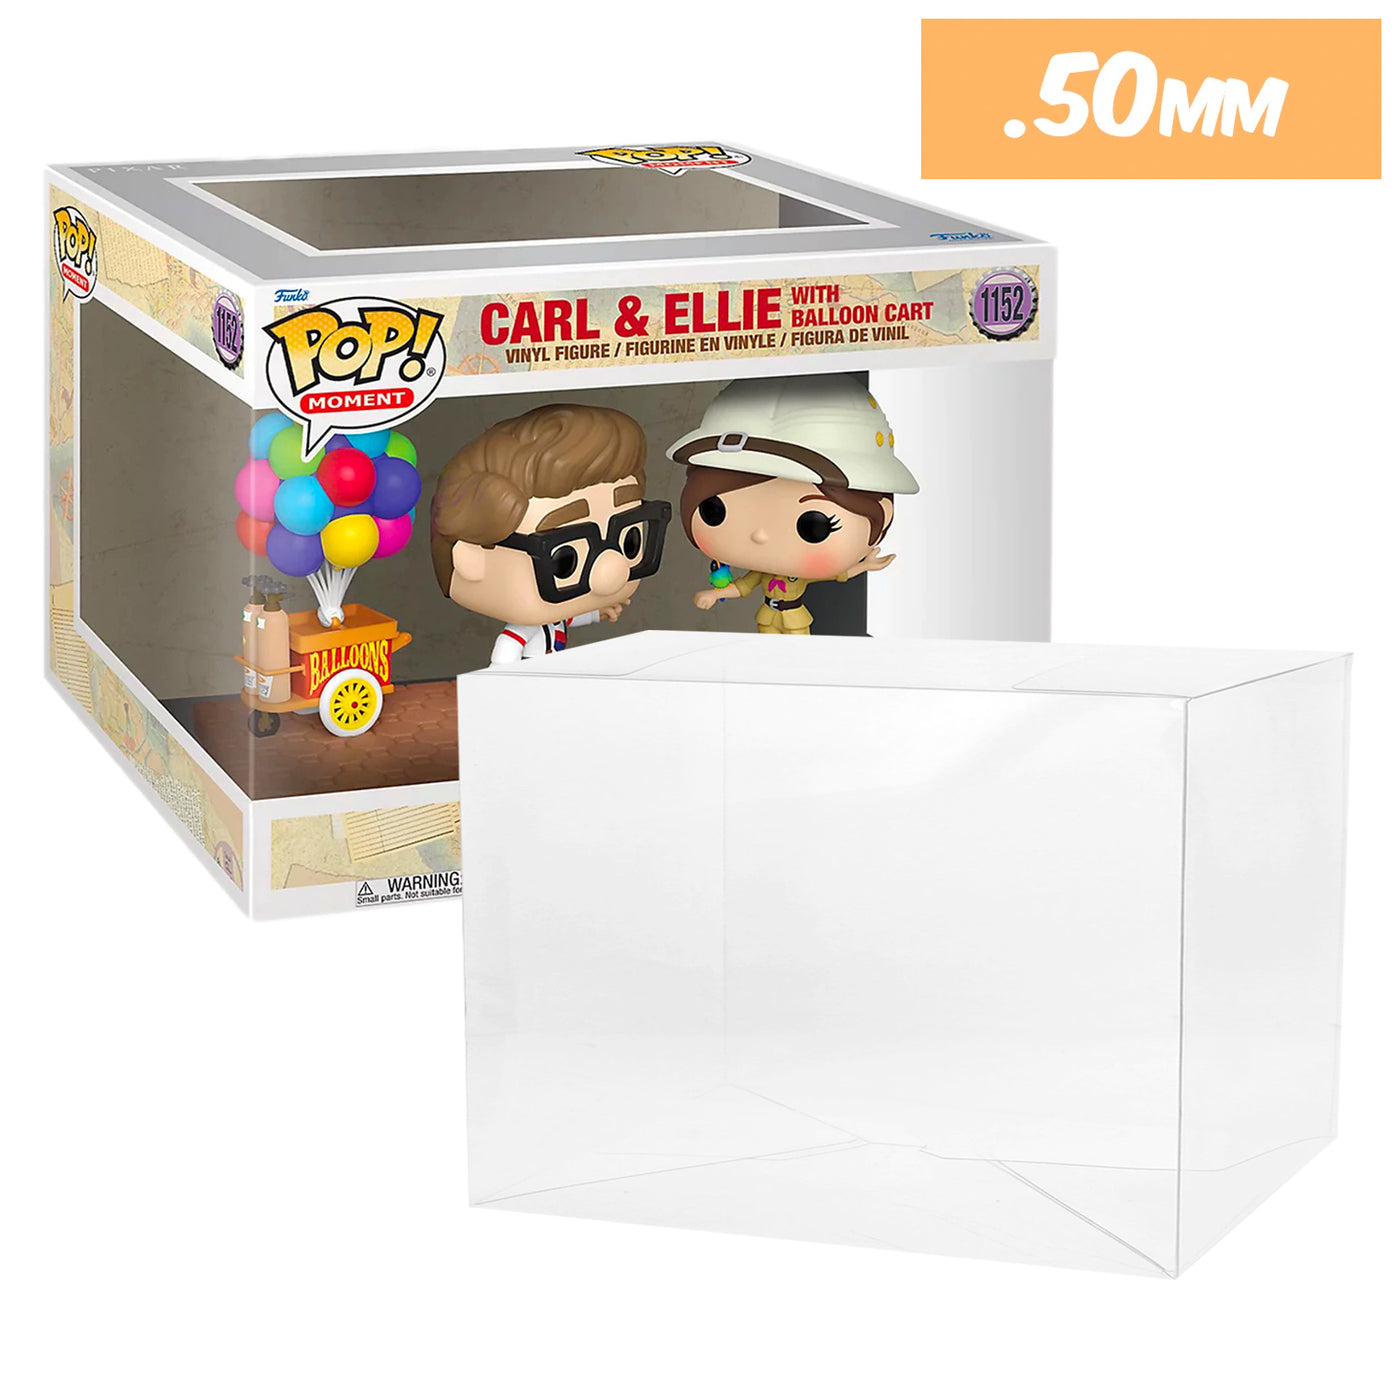 Carl and Ellie with Ballon Cart pop moment best funko pop protectors thick strong uv scratch flat top stack vinyl display geek plastic shield vaulted eco armor fits collect protect display case kollector protector